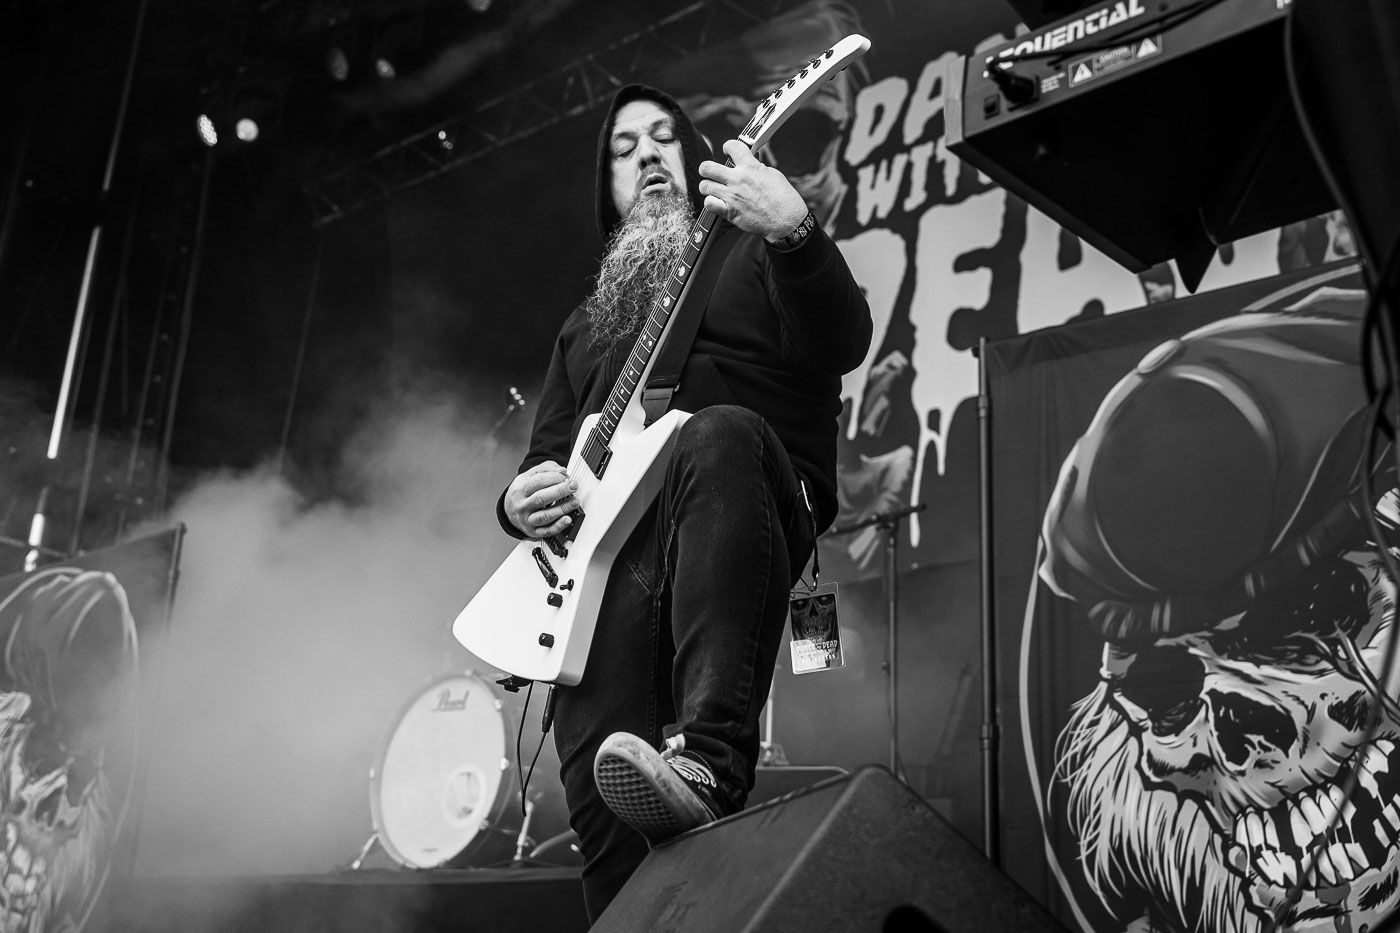 Dance with the Dead @ Copenhell